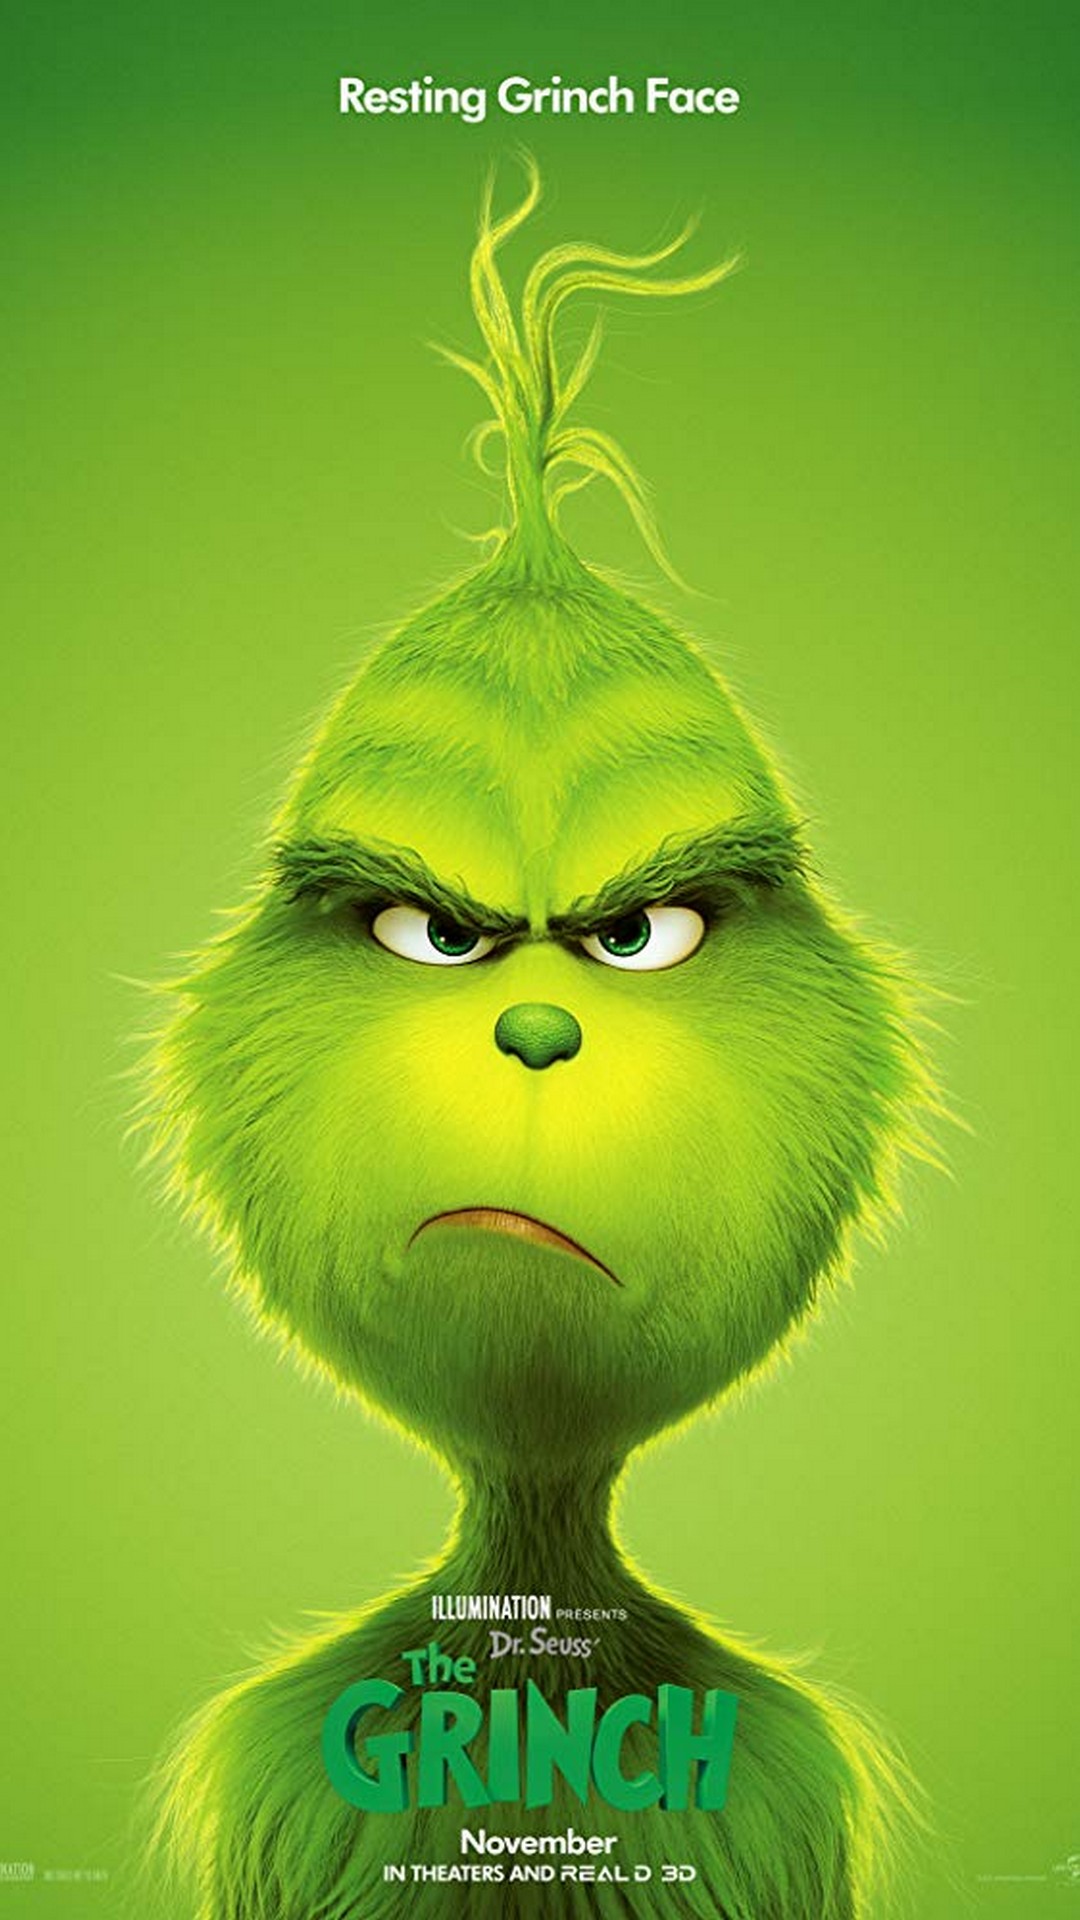 The Grinch iPhone Wallpaper with image resolution 1080x1920 pixel. You can use this wallpaper as background for your desktop Computer Screensavers, Android or iPhone smartphones